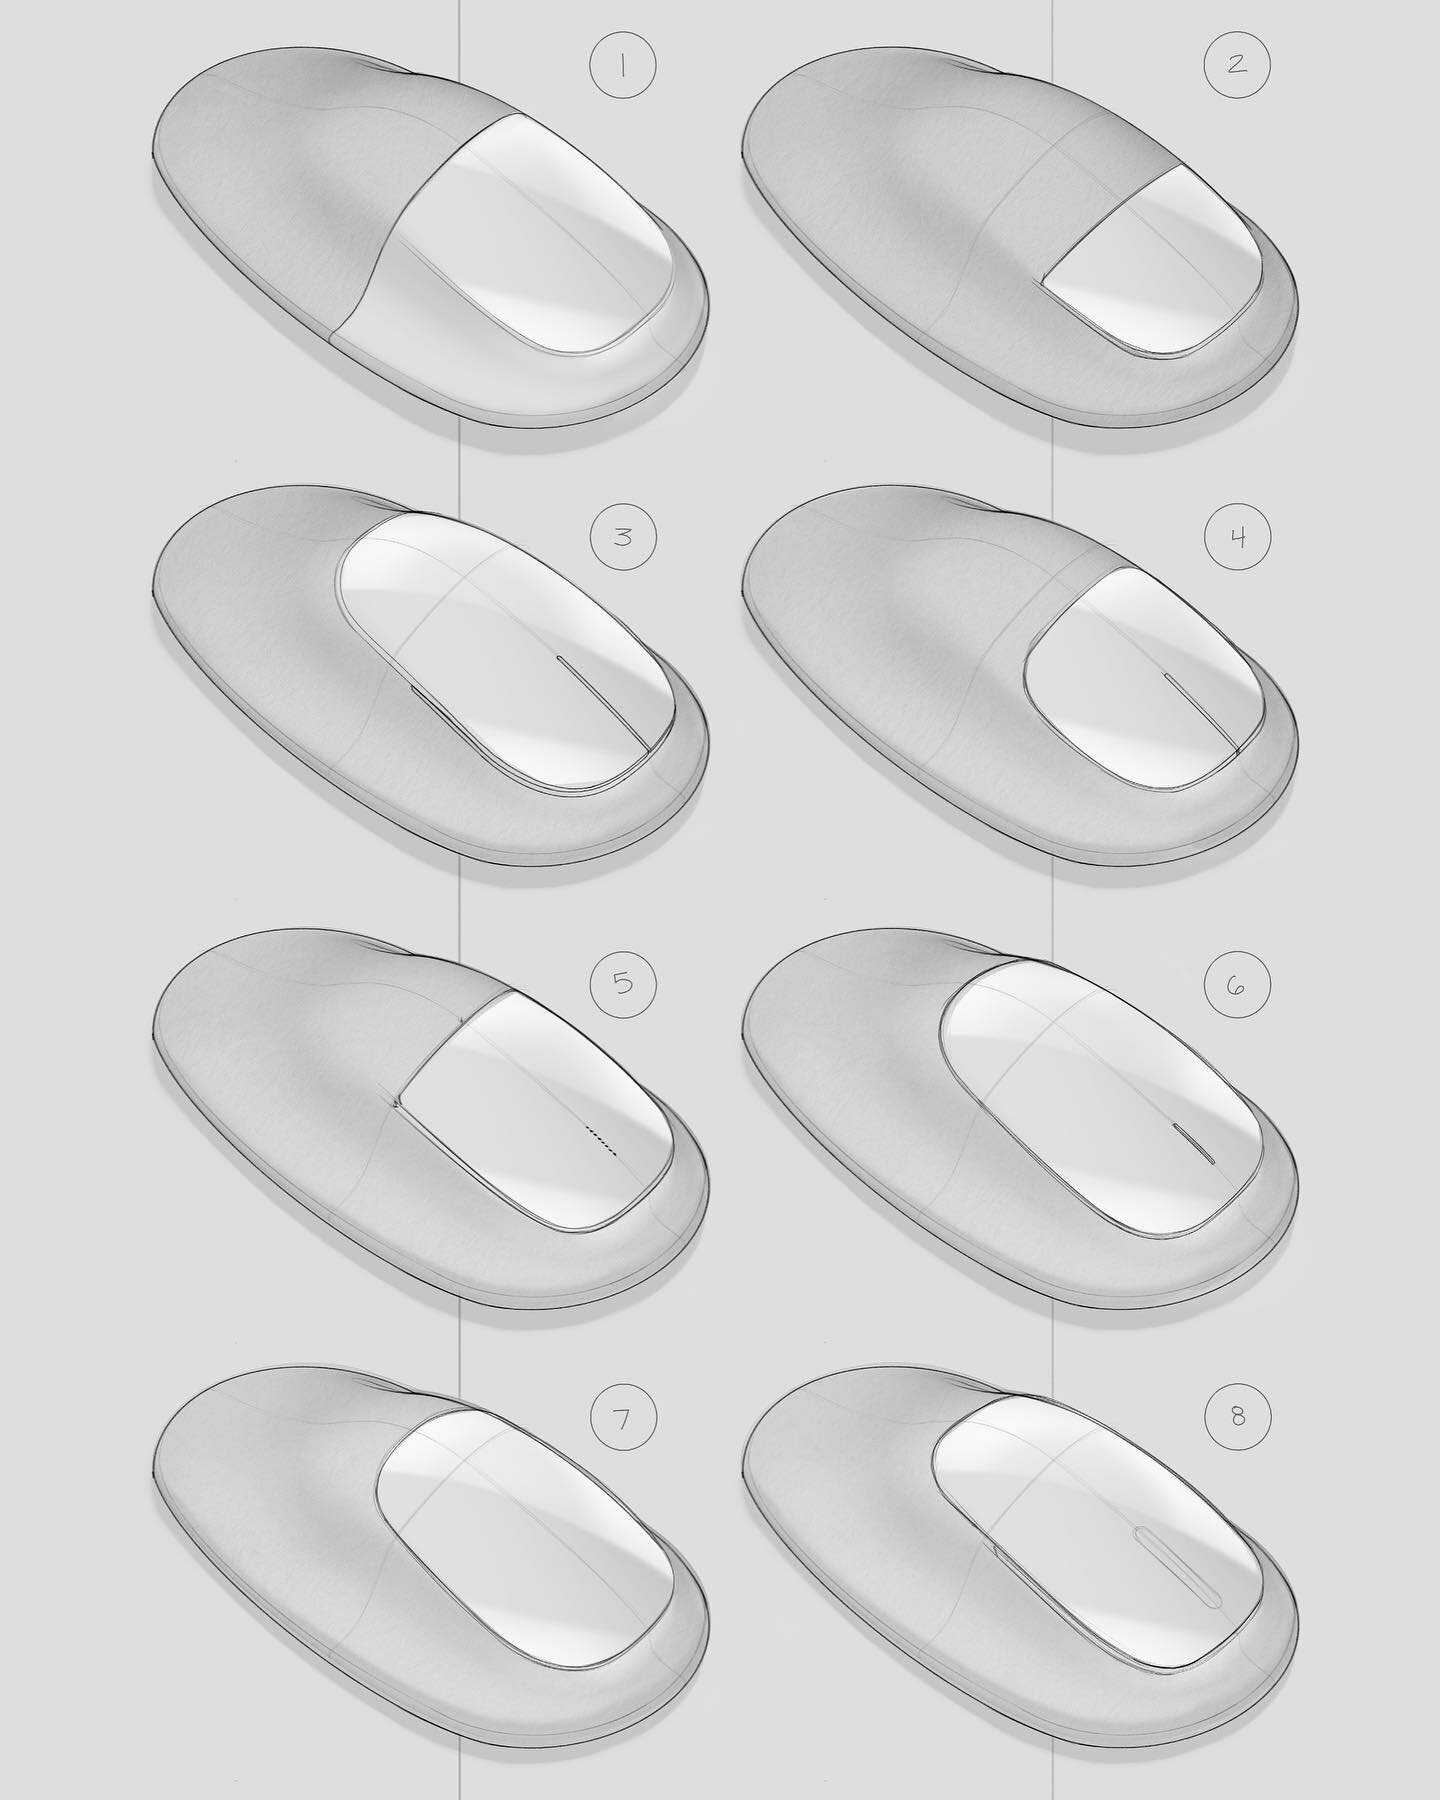 This exploration is far from exhaustive, but what concepts are you most interested in?
&mdash;
I&rsquo;m personally most drawn to this being an Apple Magic Mouse 2.0, which leads me to think concept 7 would be my choice. I&rsquo;m still interested in